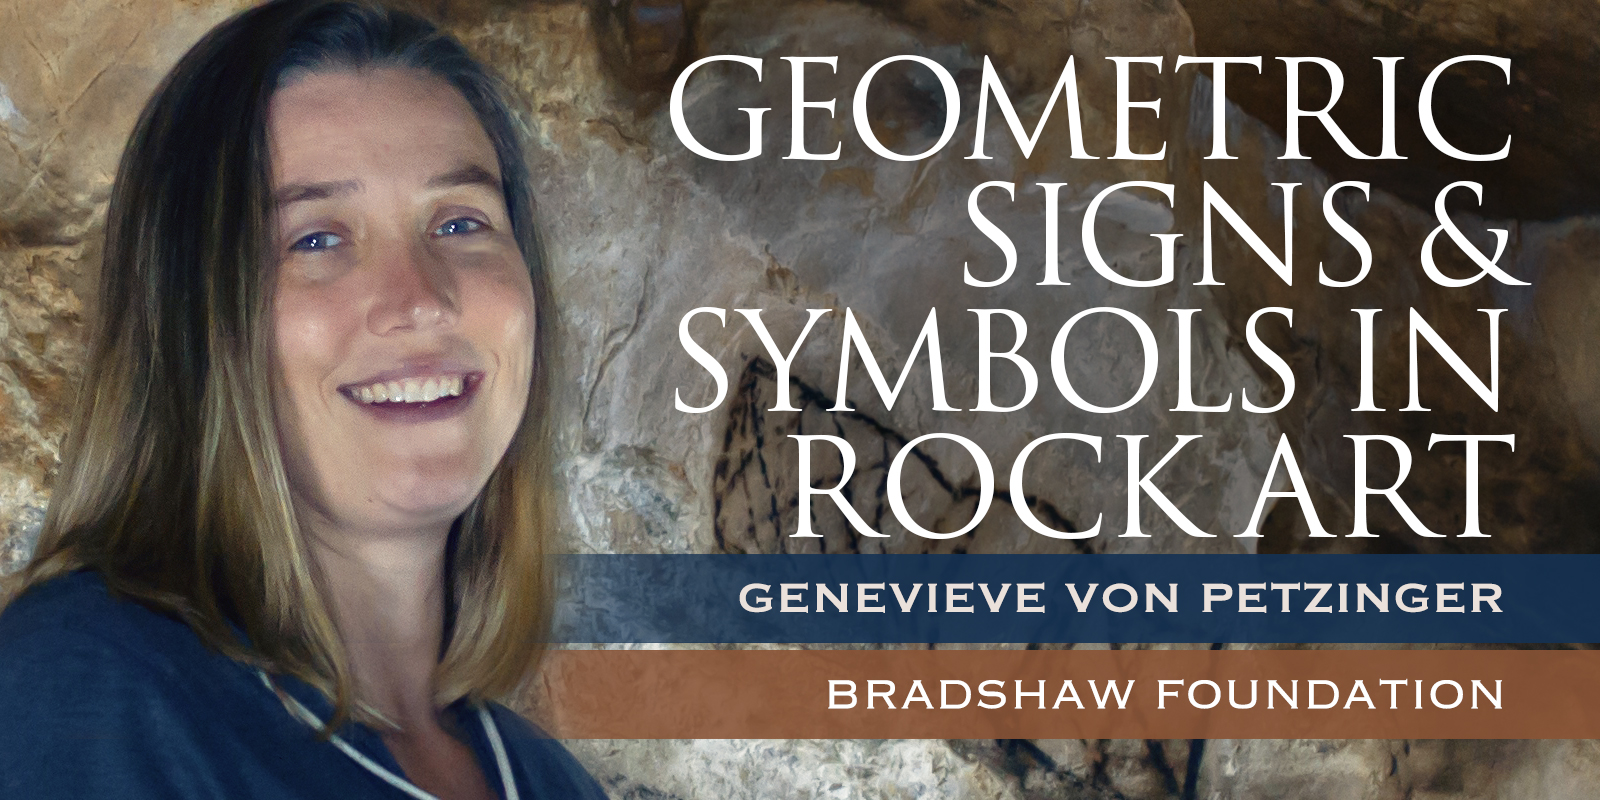 Genevieve von Petzinger Geometric Signs & Symbols in Rock Art Why Should We Care about the Geometric Signs?